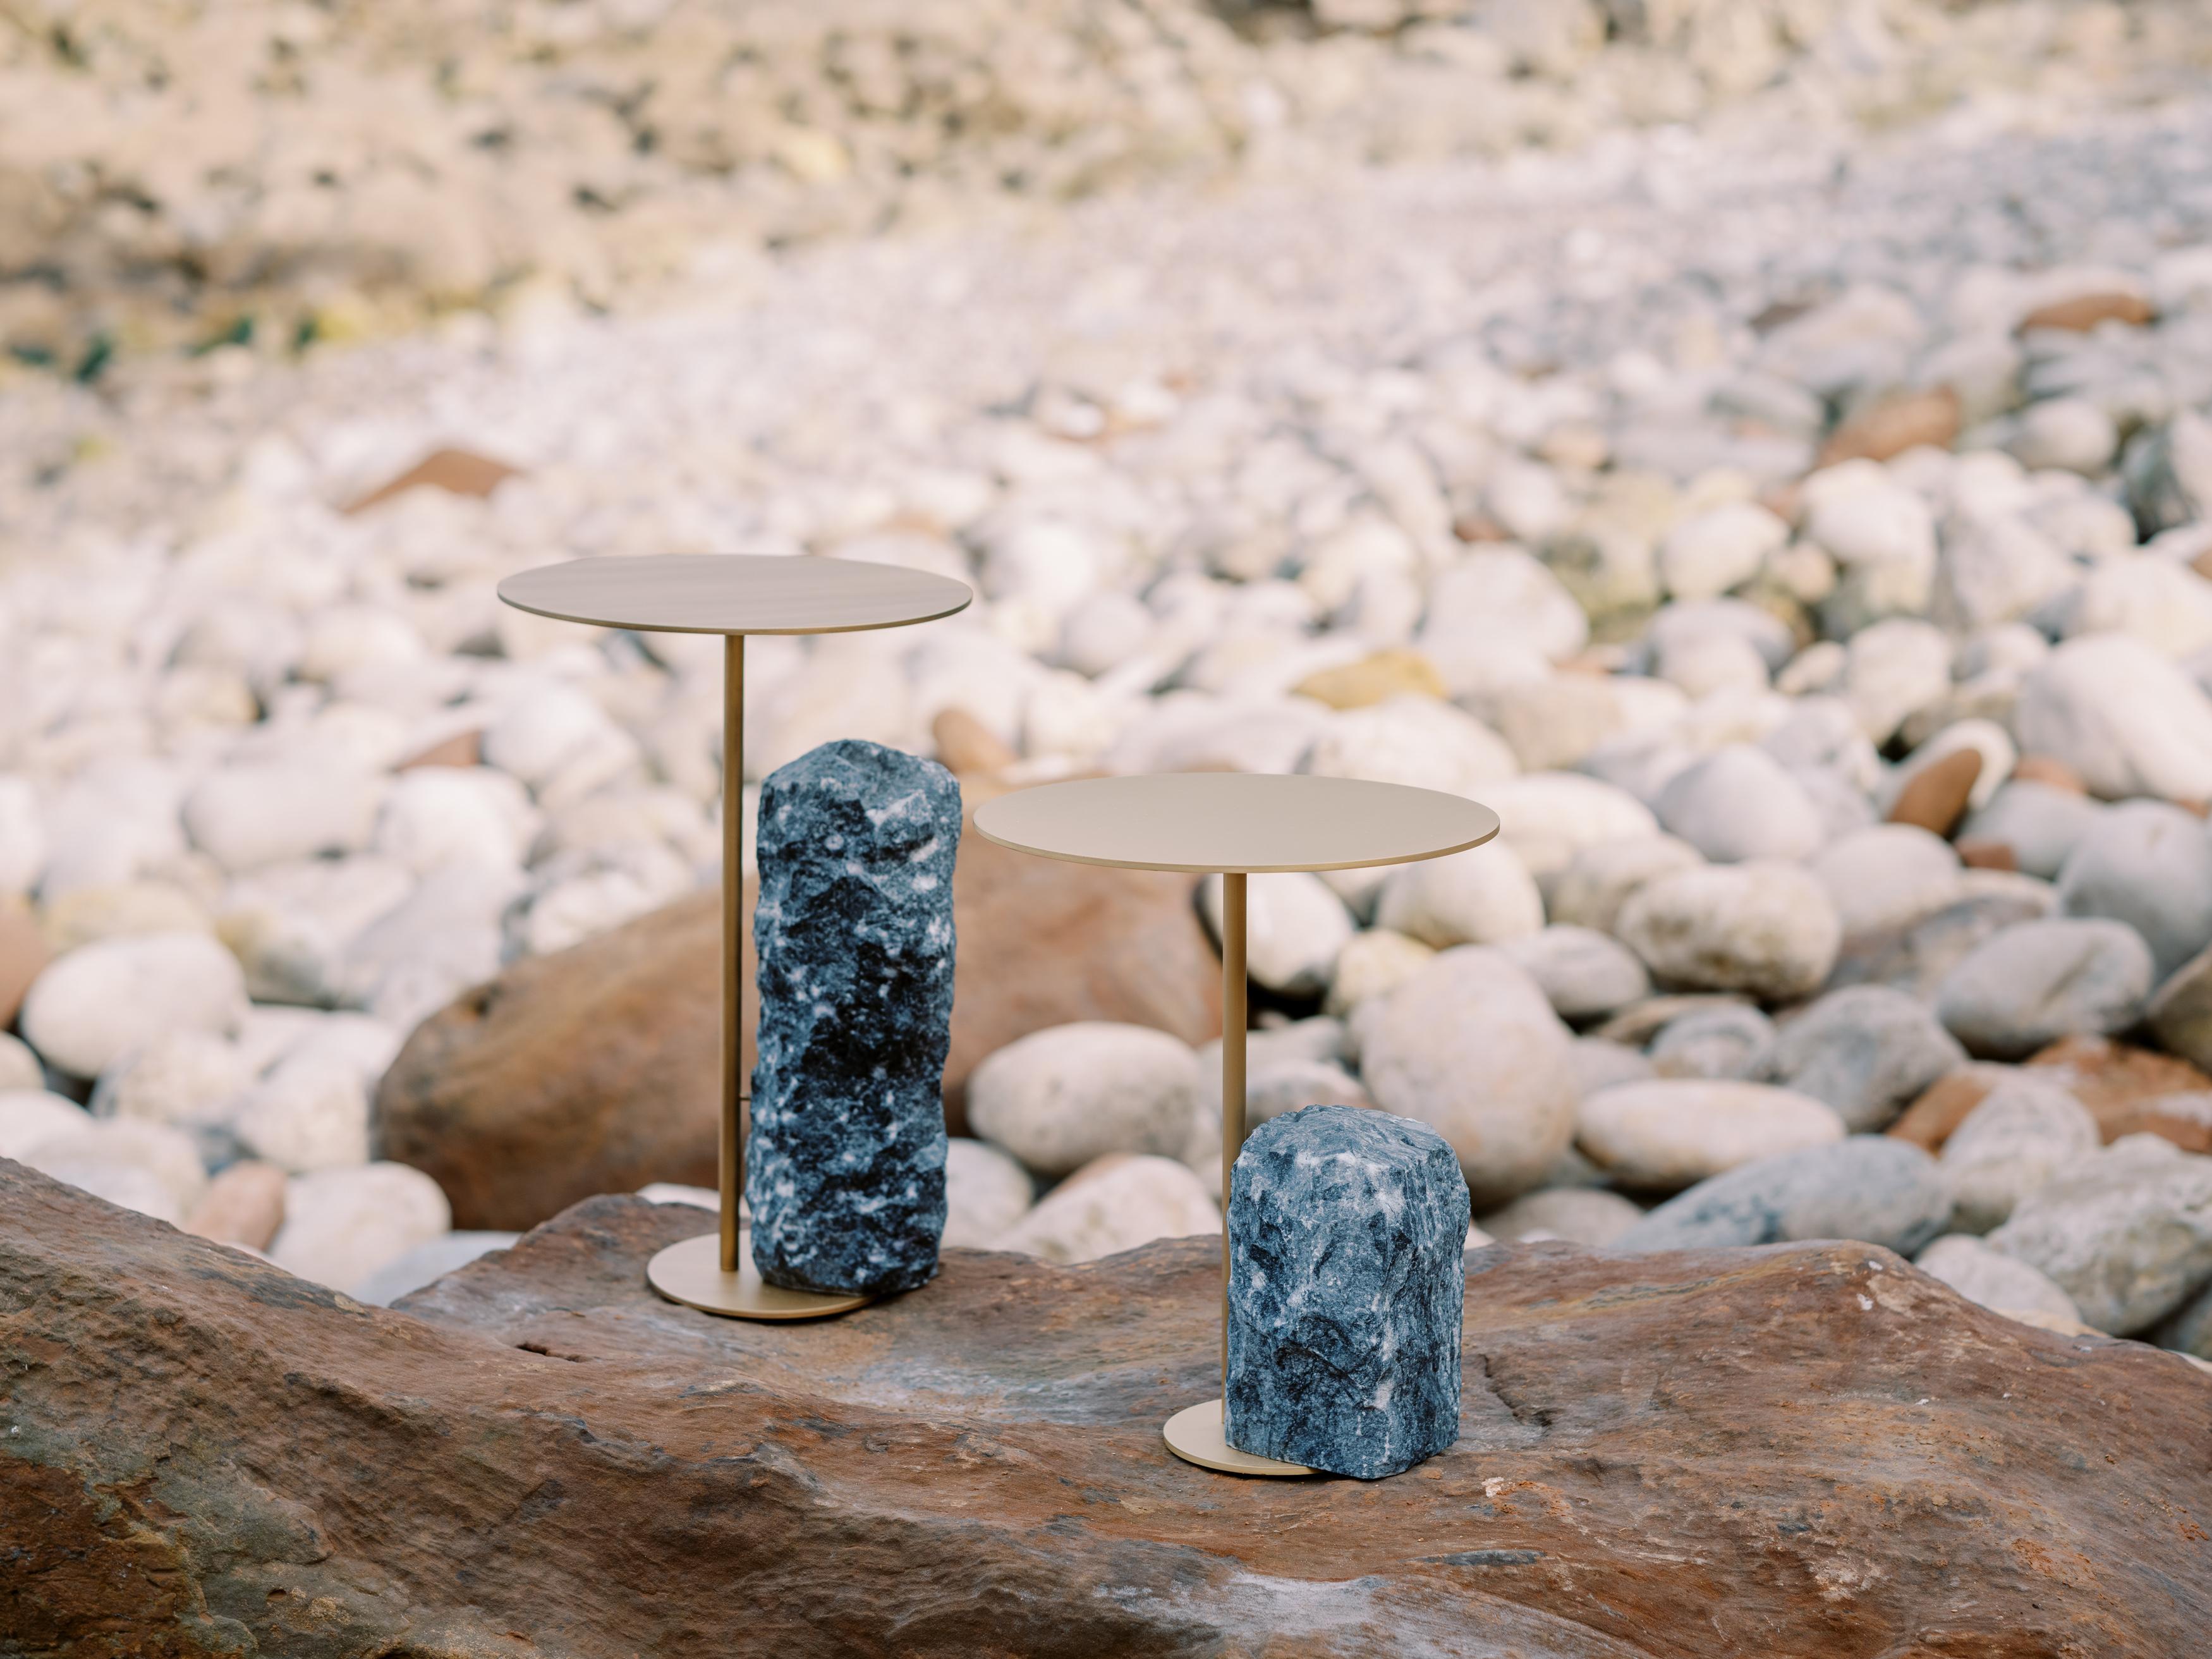 Pico Side Table, Contemporary Collection, Handcrafted in Portugal - Europe by Greenapple.

The Pico side table seamlessly integrates nature’s elements to bring the essence of the island of Pico in the Azores into the contemporary interior. Drawing